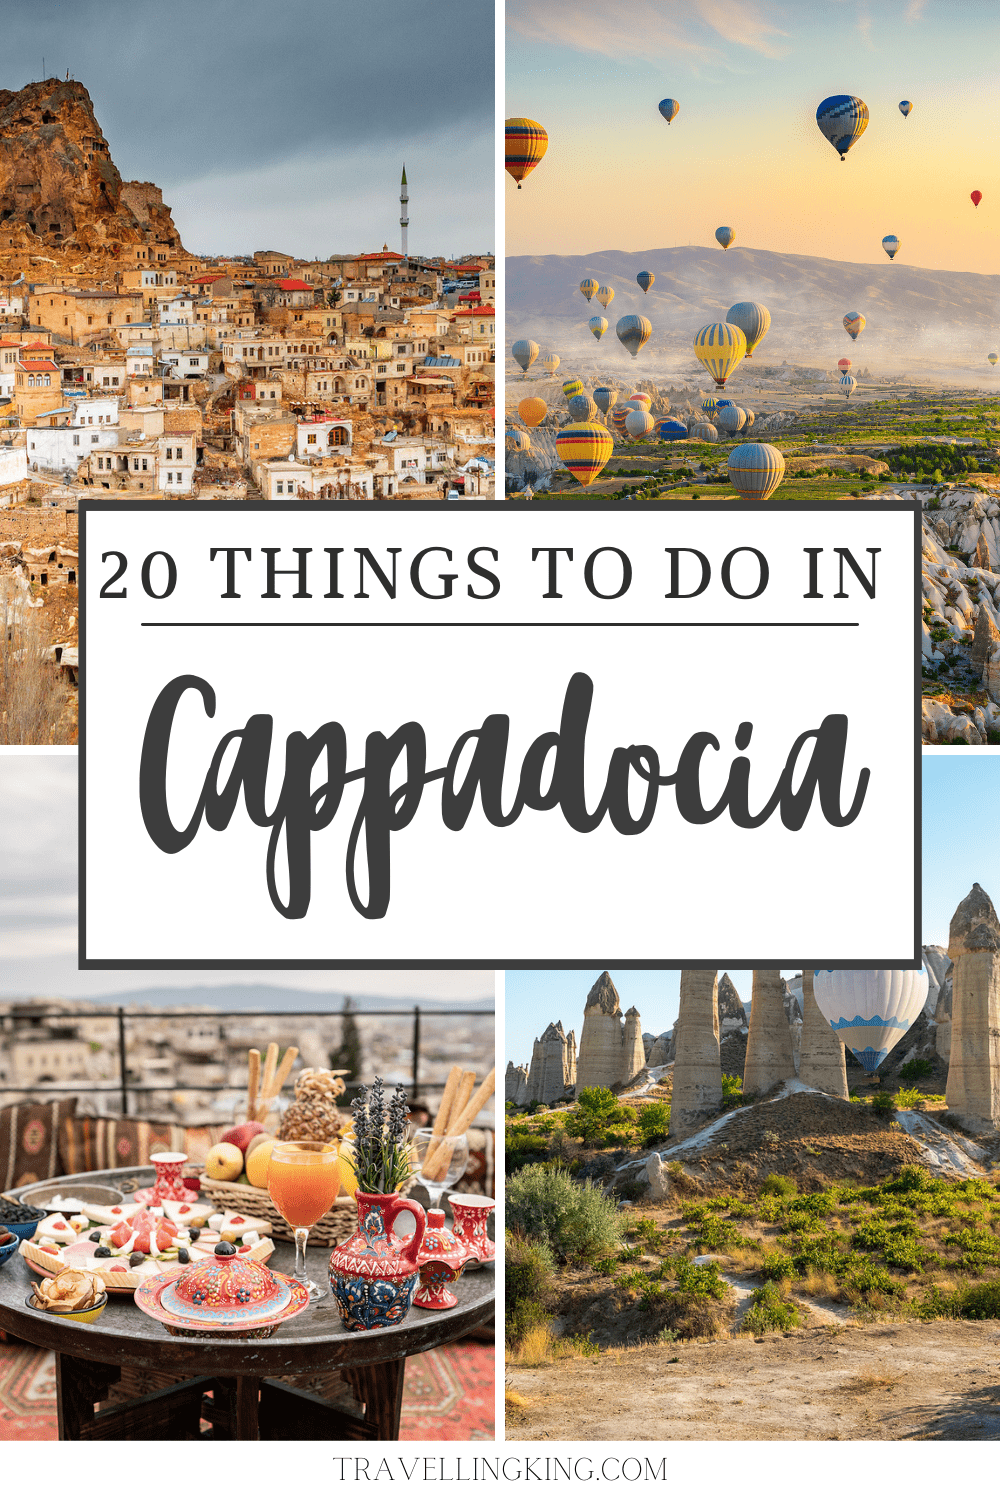 20 Things to do in Cappadocia